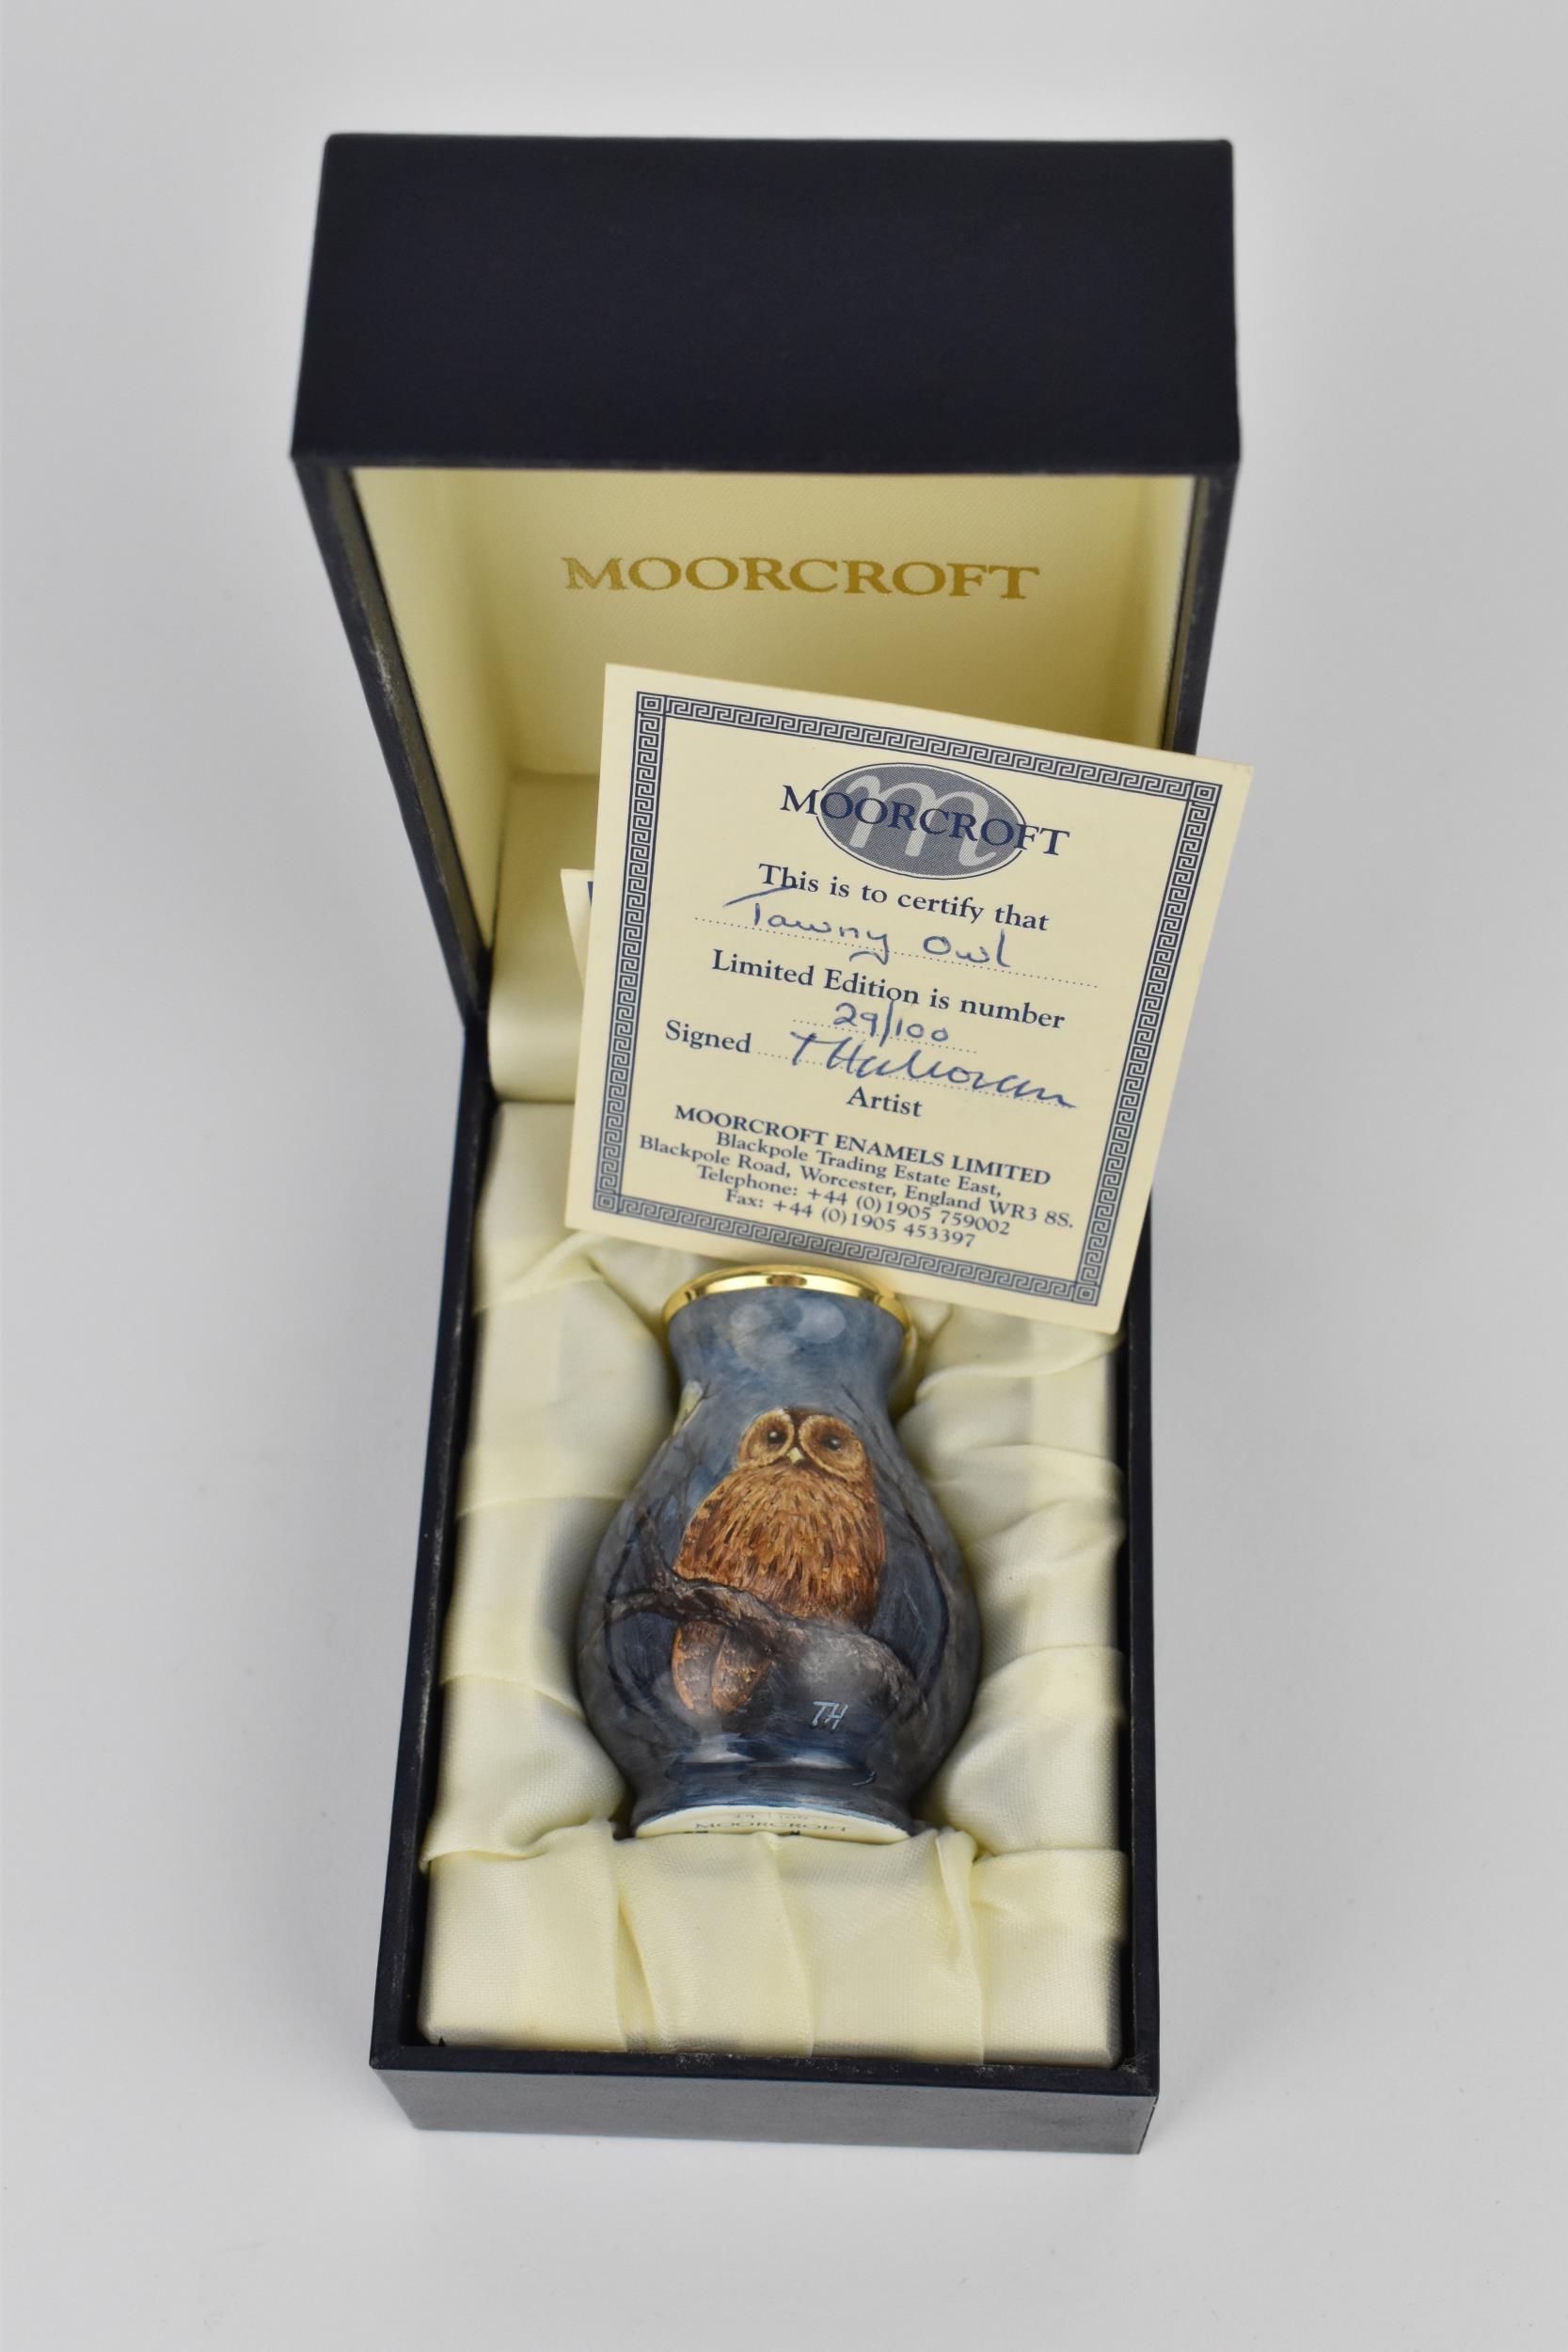 A limited edition Moorcroft enamels Ltd miniature baluster vase by Terry Halloran, in the 'Tawny - Image 2 of 3